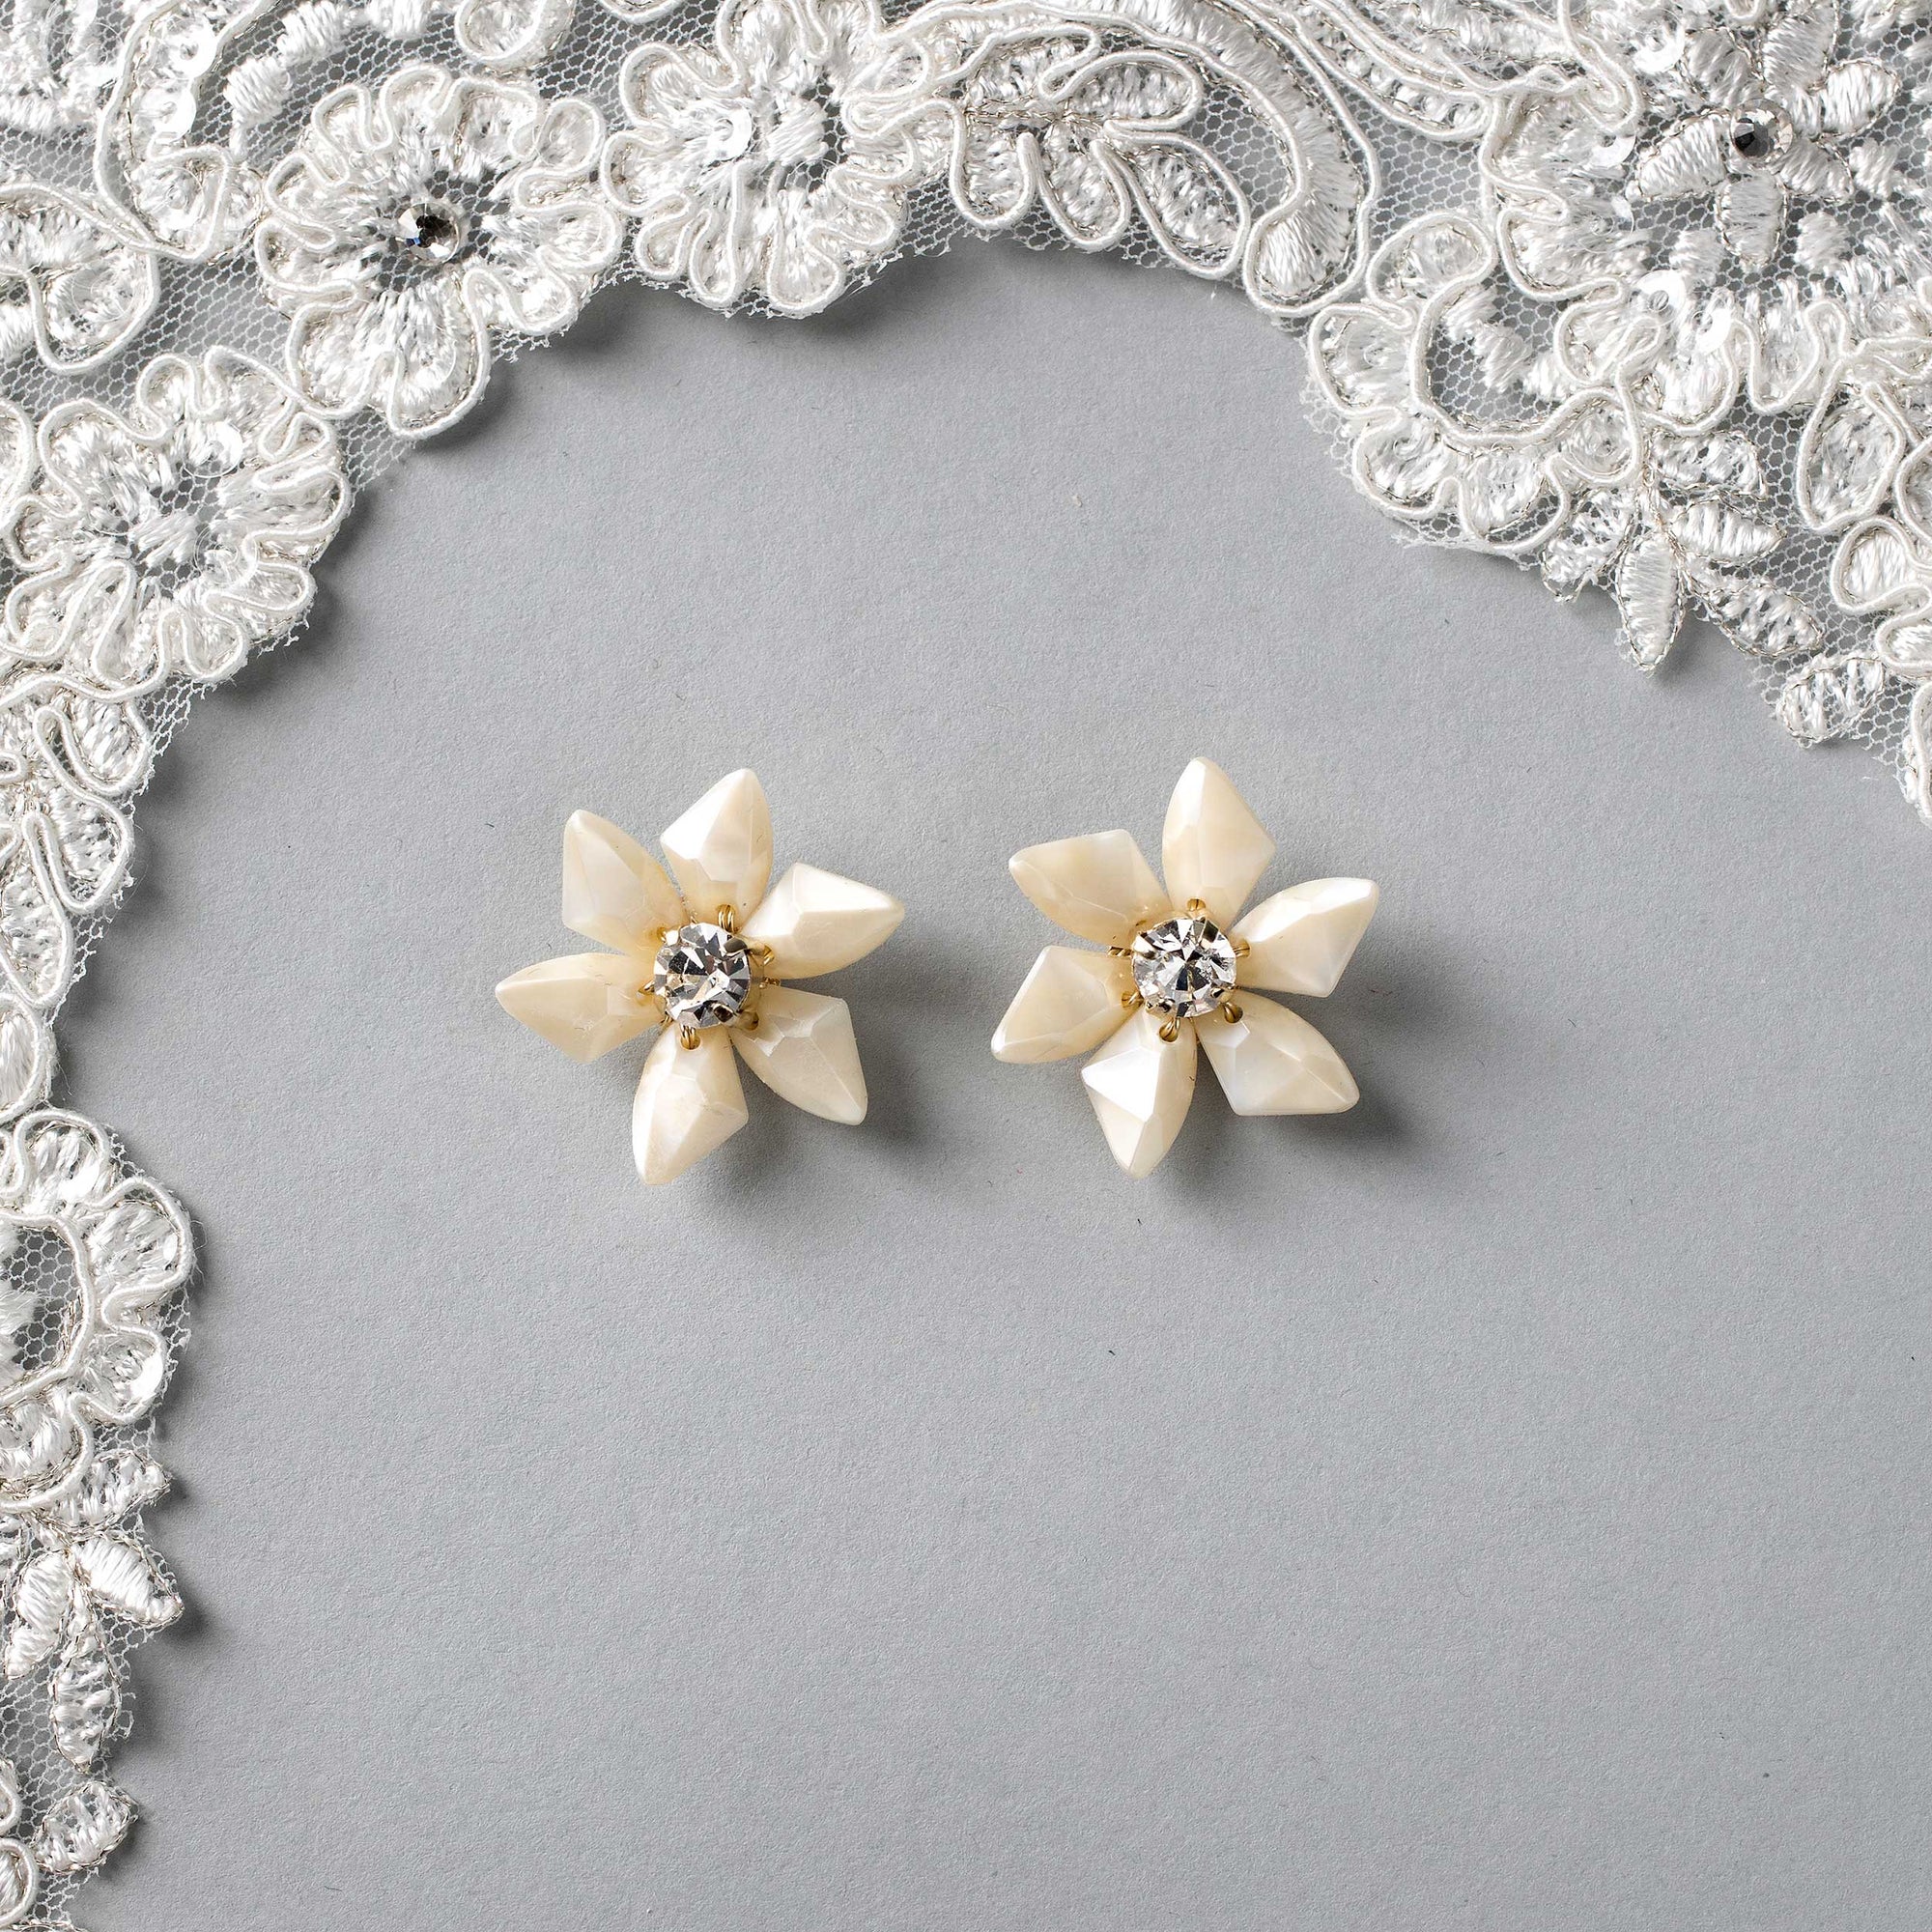 Ivory and Gold Flower Stud Earrings